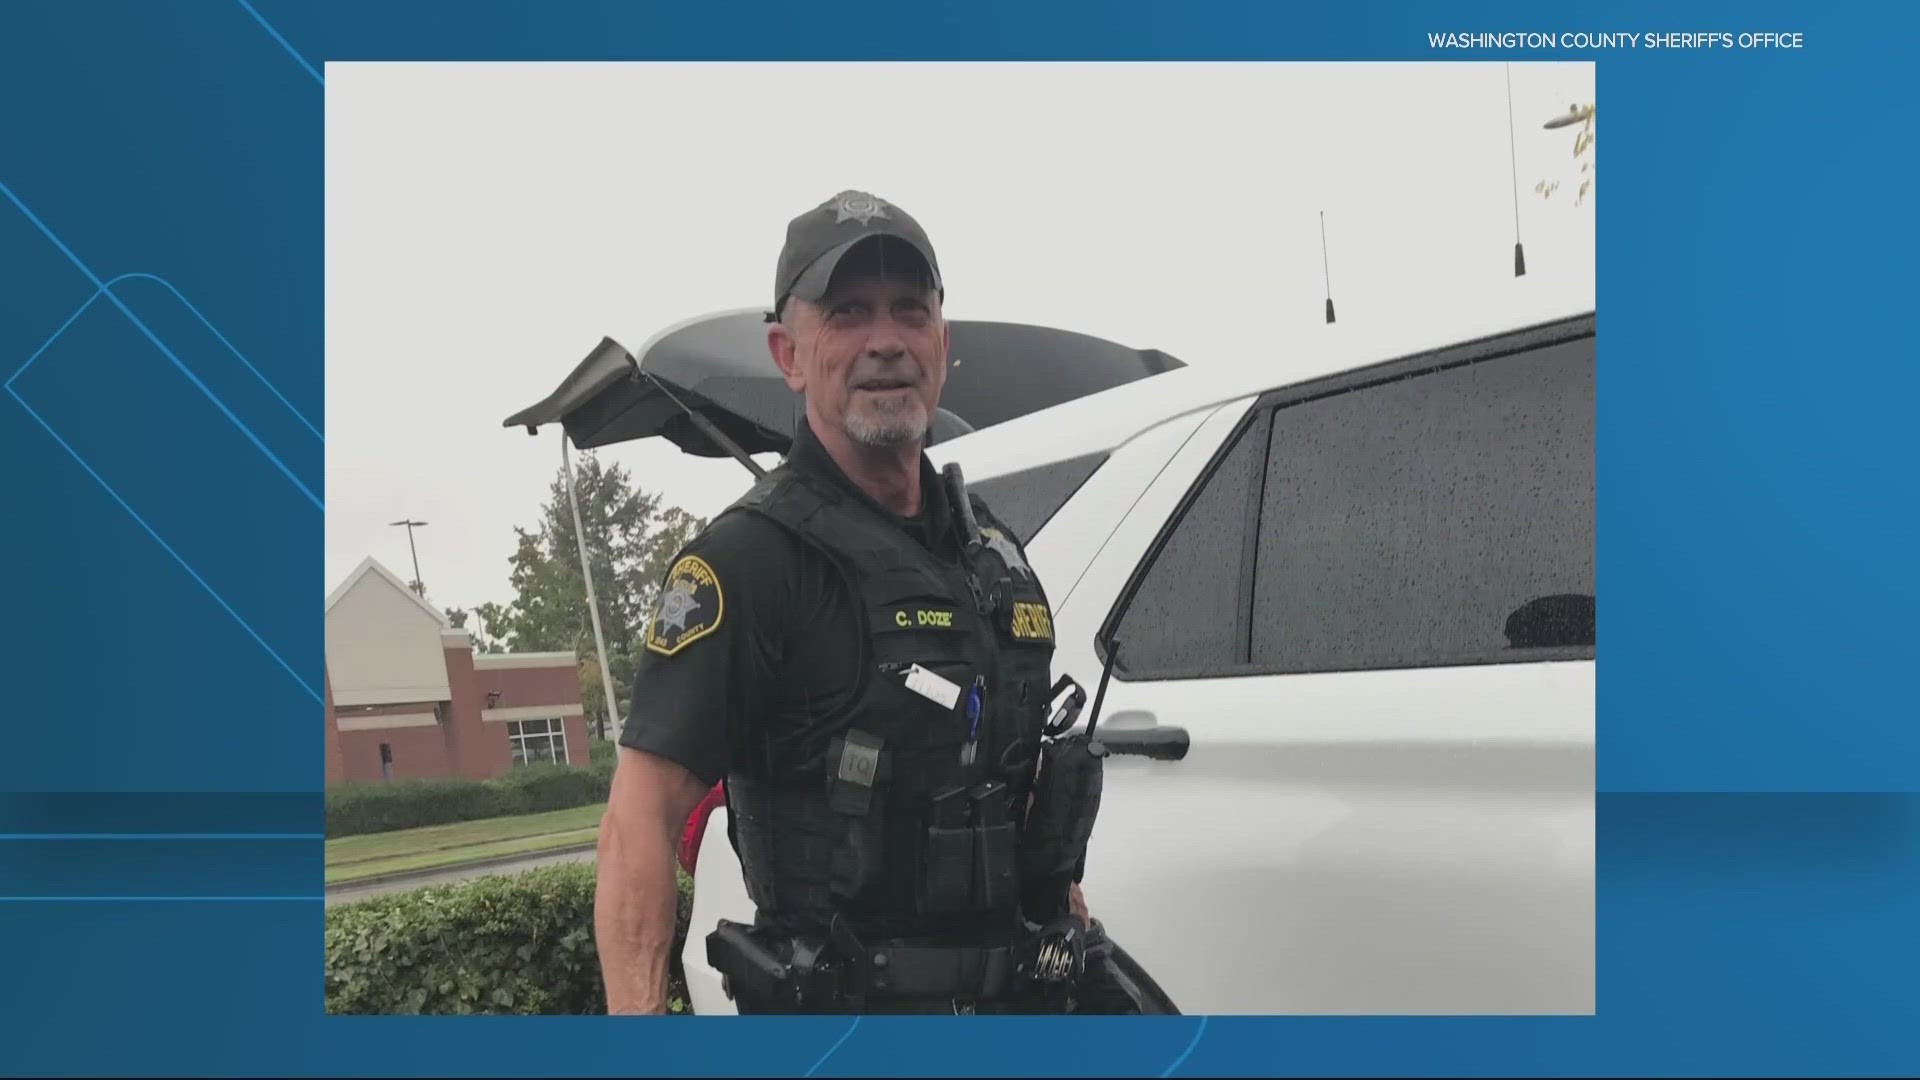 Civil Deputy Charles Dozé is a 10-year veteran of the Washington County Sheriff's Office. He was shot while serving an eviction notice on Wednesday.